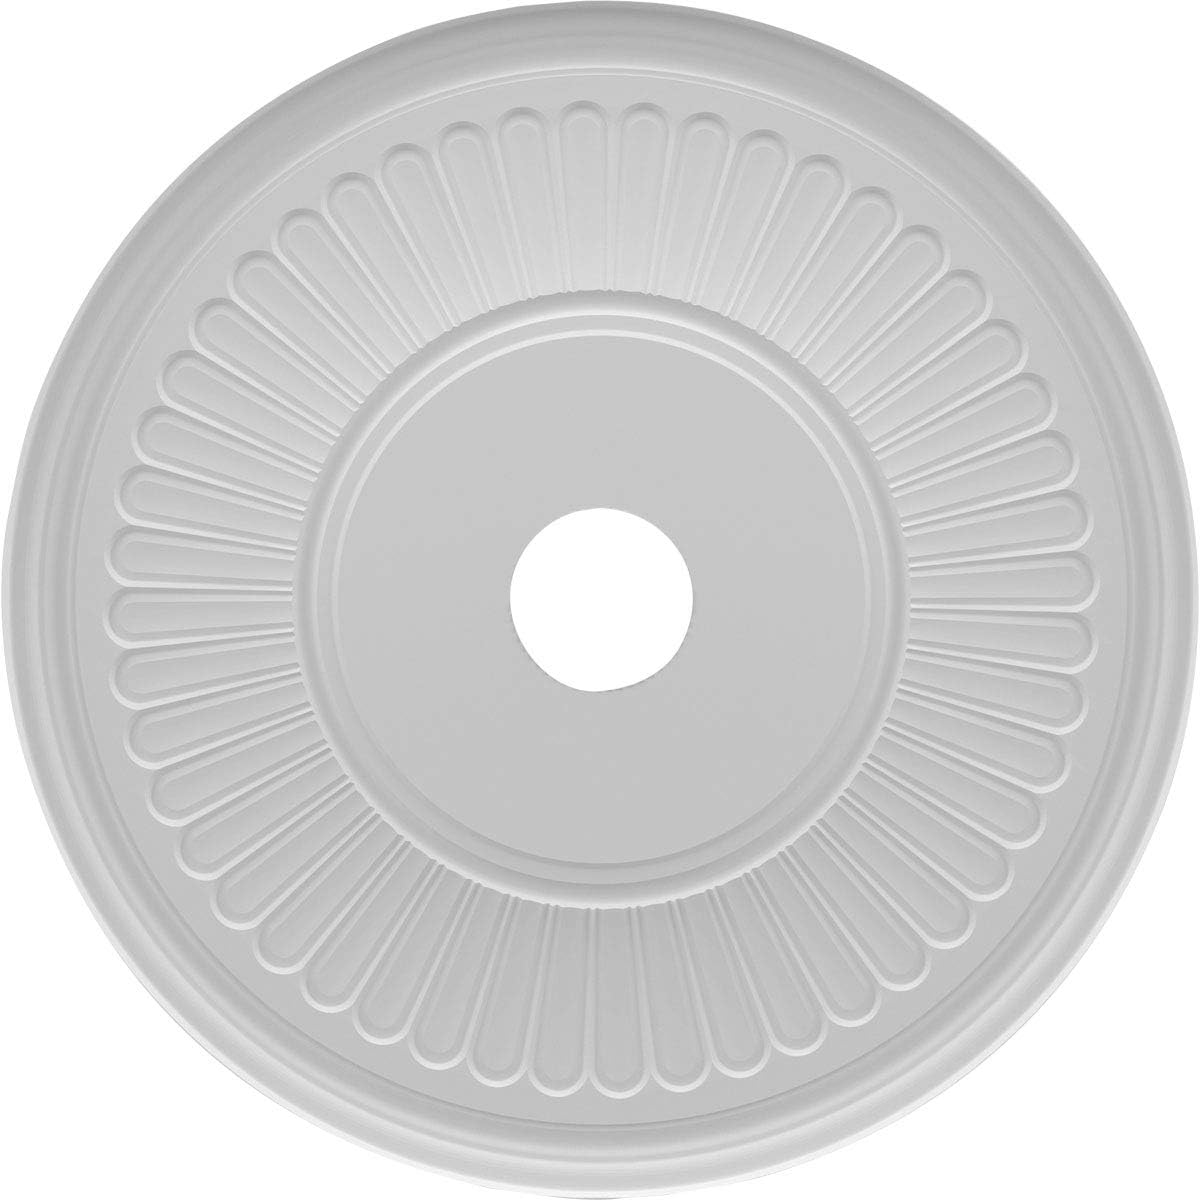 Ekena Millwork CMP22BE Berkshire Thermoformed PVC Ceiling Medallion (Fits Canopies up to 10 1/8"), 22"OD x 3 1/2"ID x 1"P